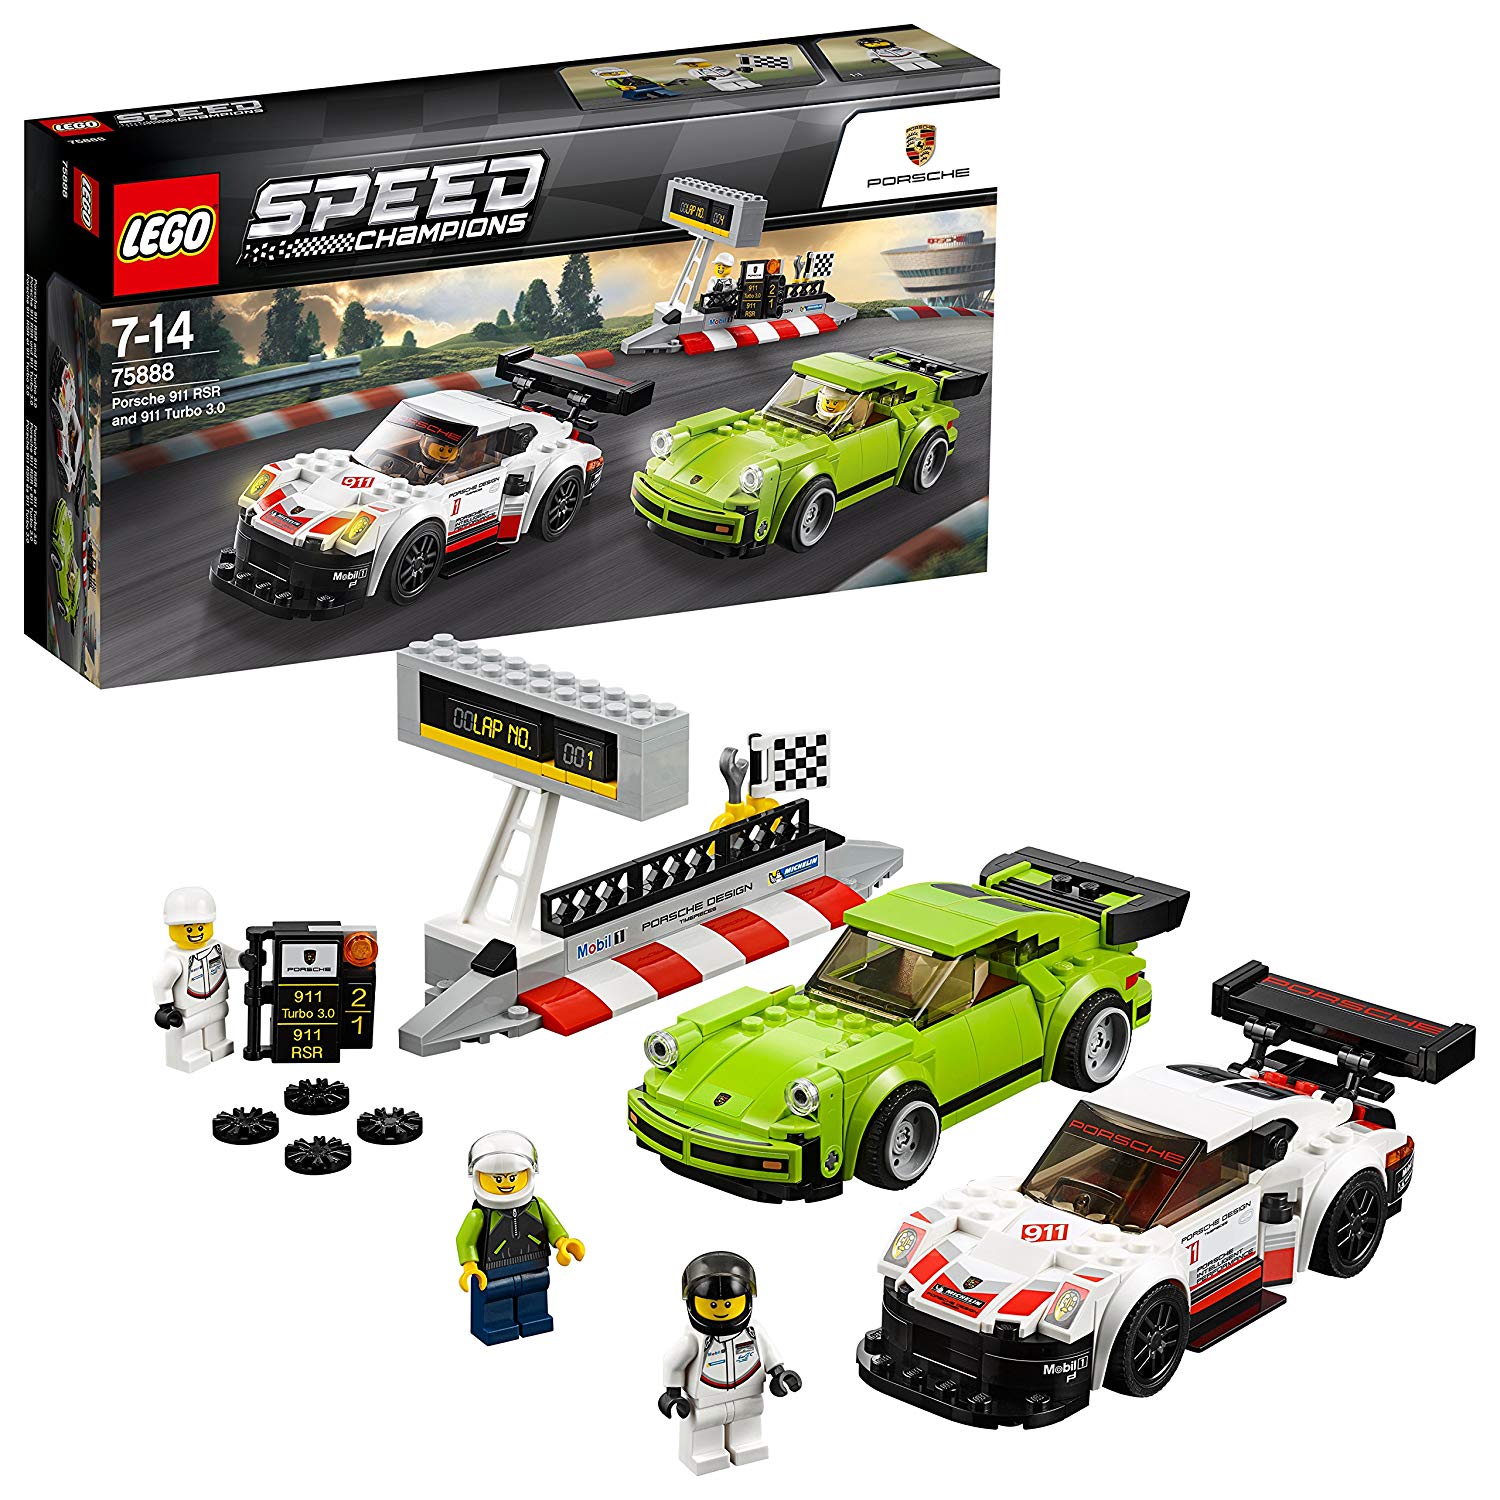 Lego Speed Champions Porsche Rsr And Turbo Construction Toy